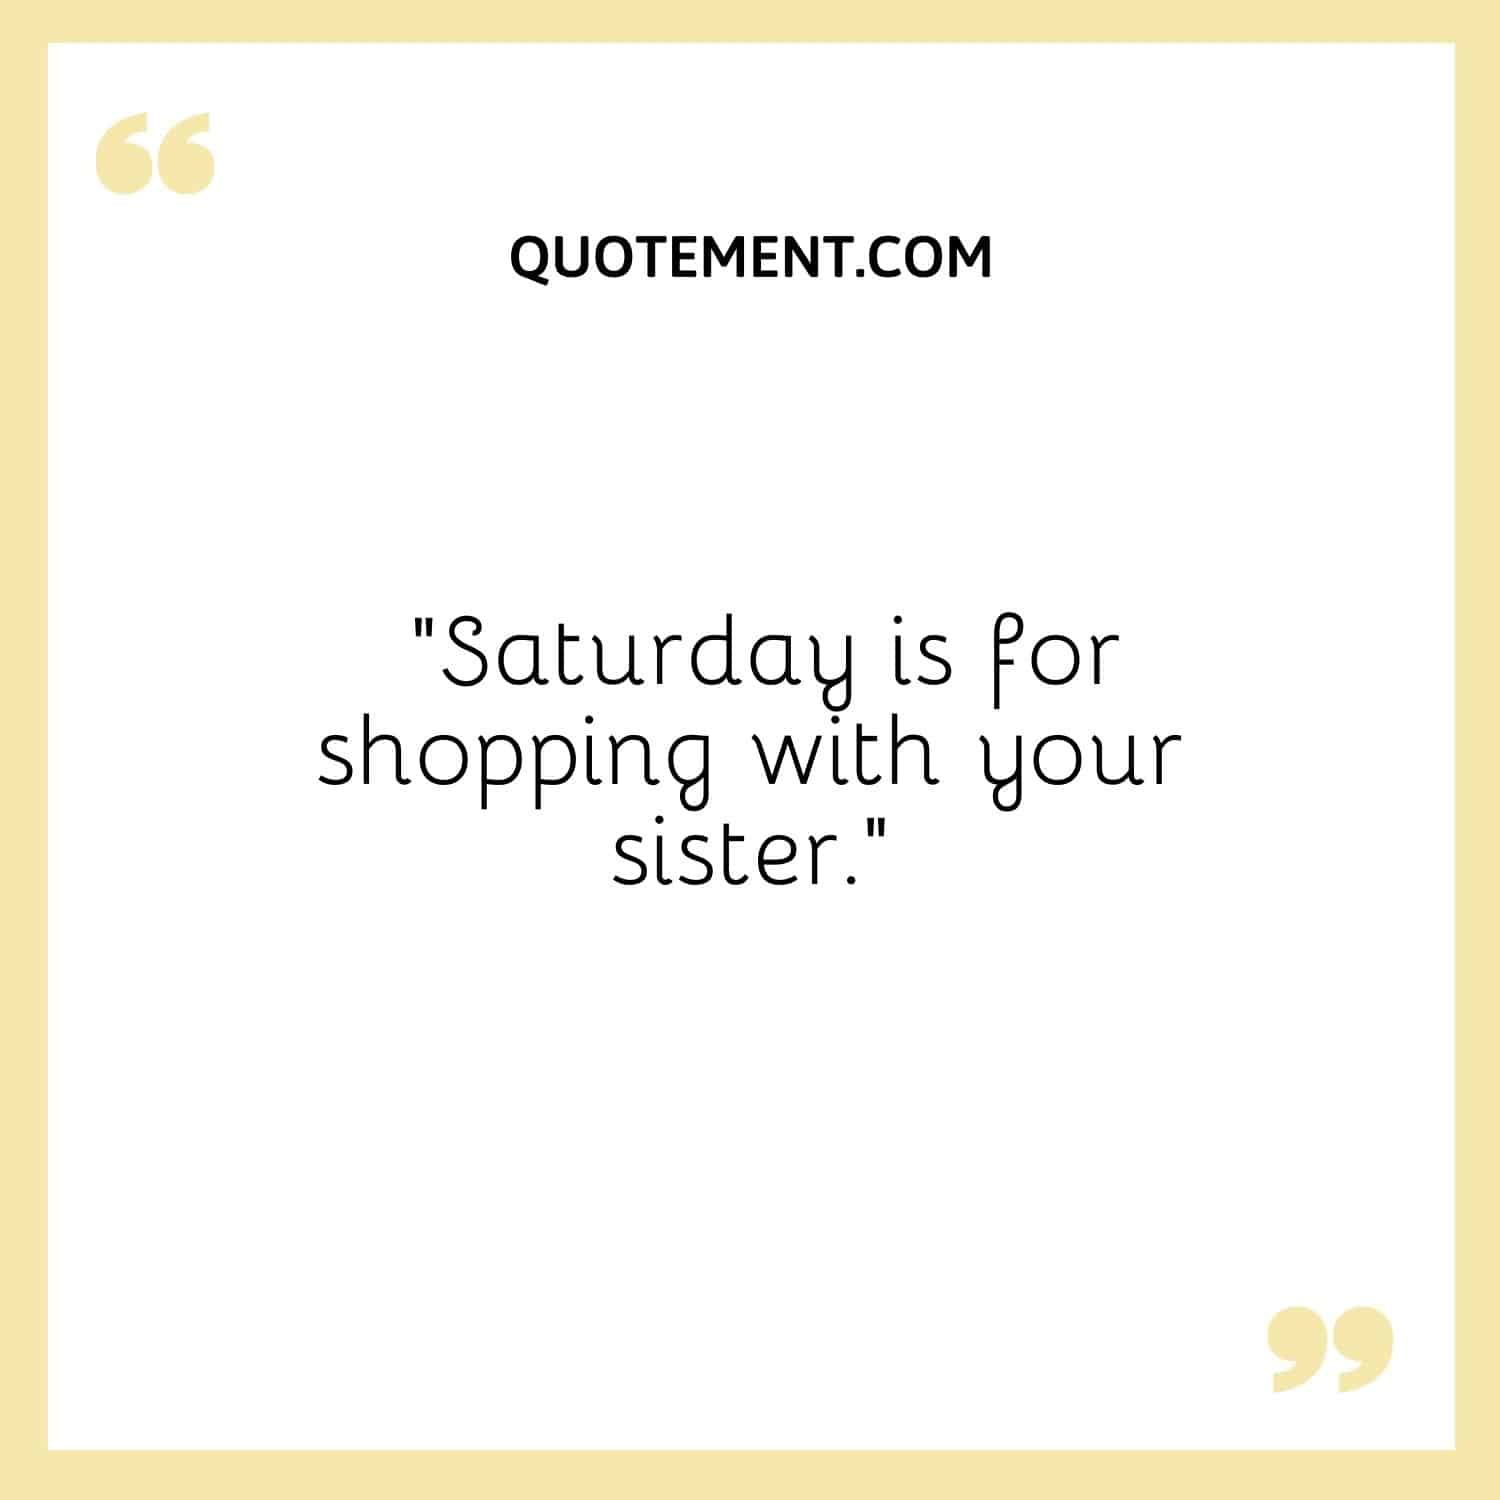 Saturday is for shopping with your sister.